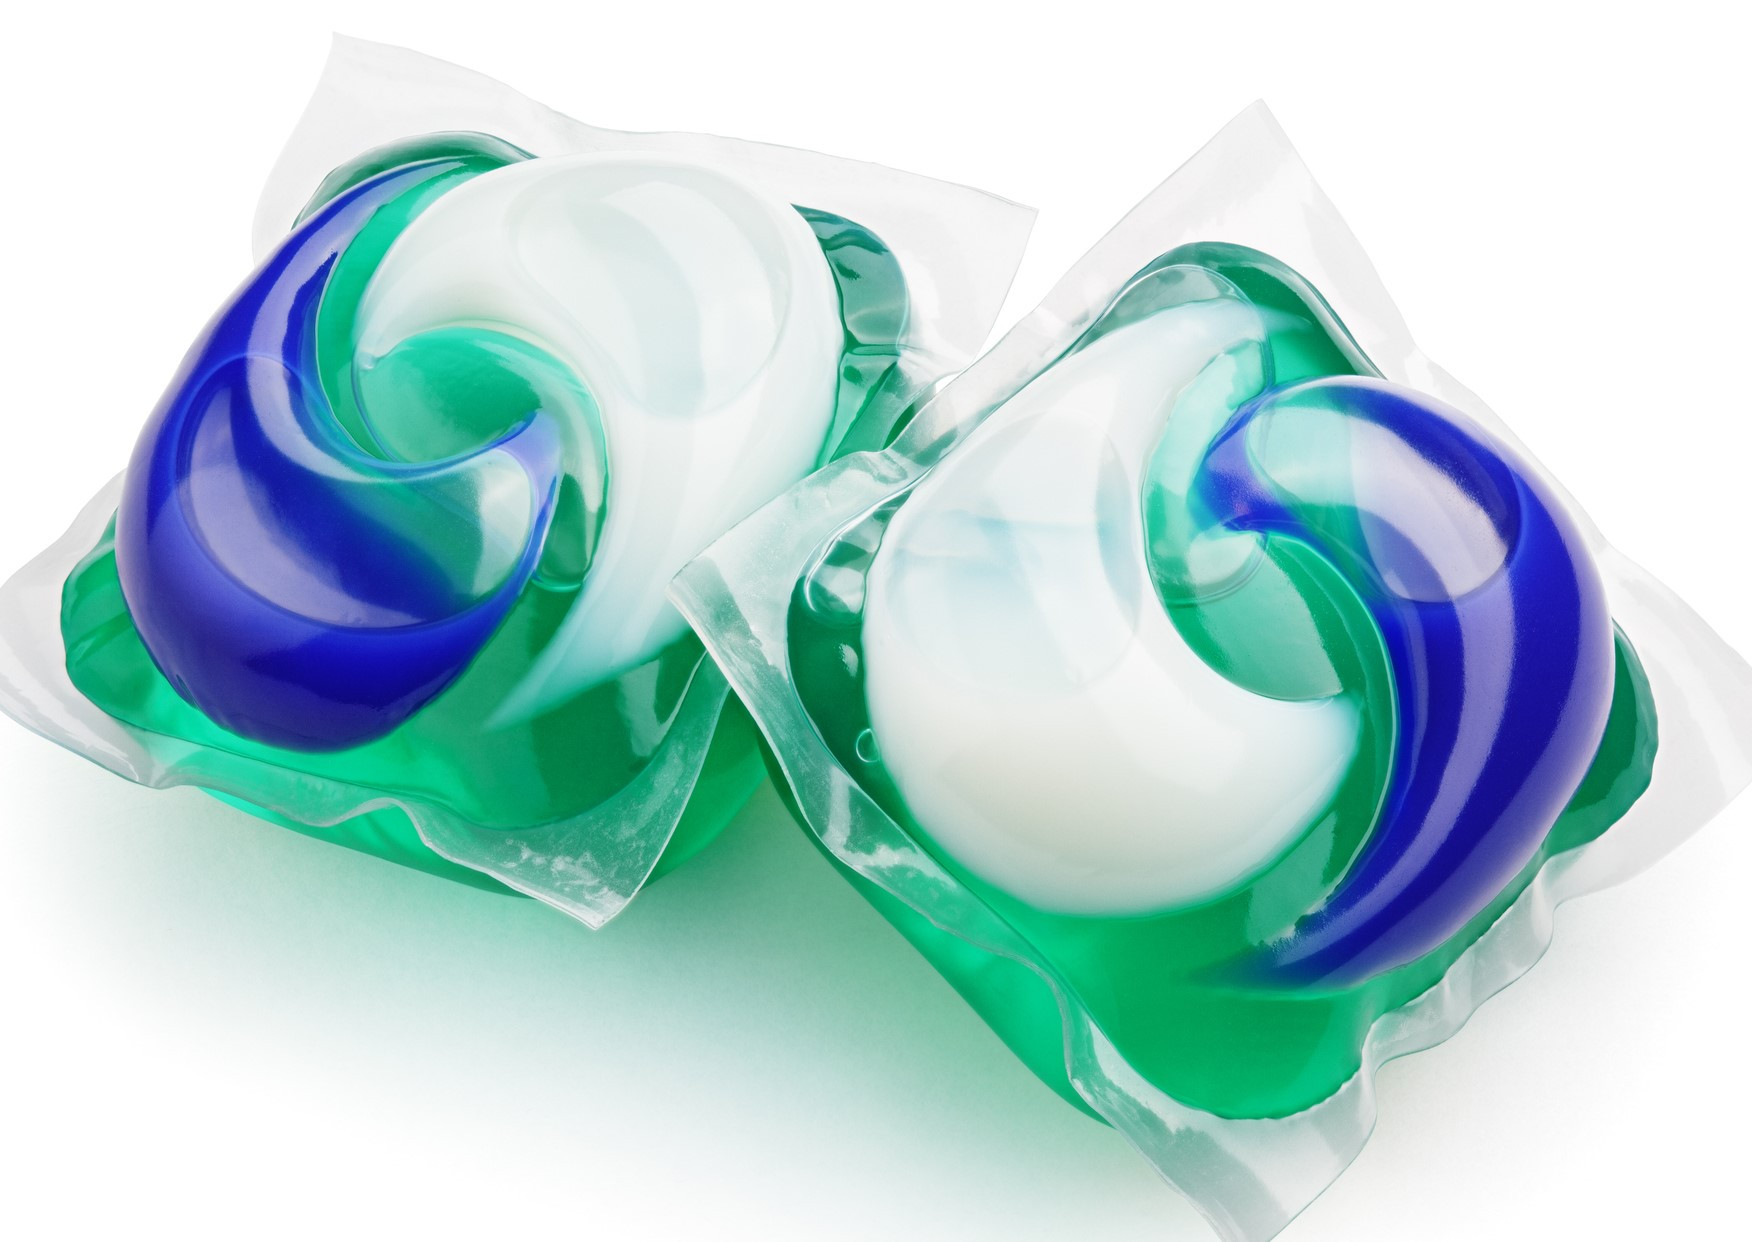 Why teenagers eat Tide pods